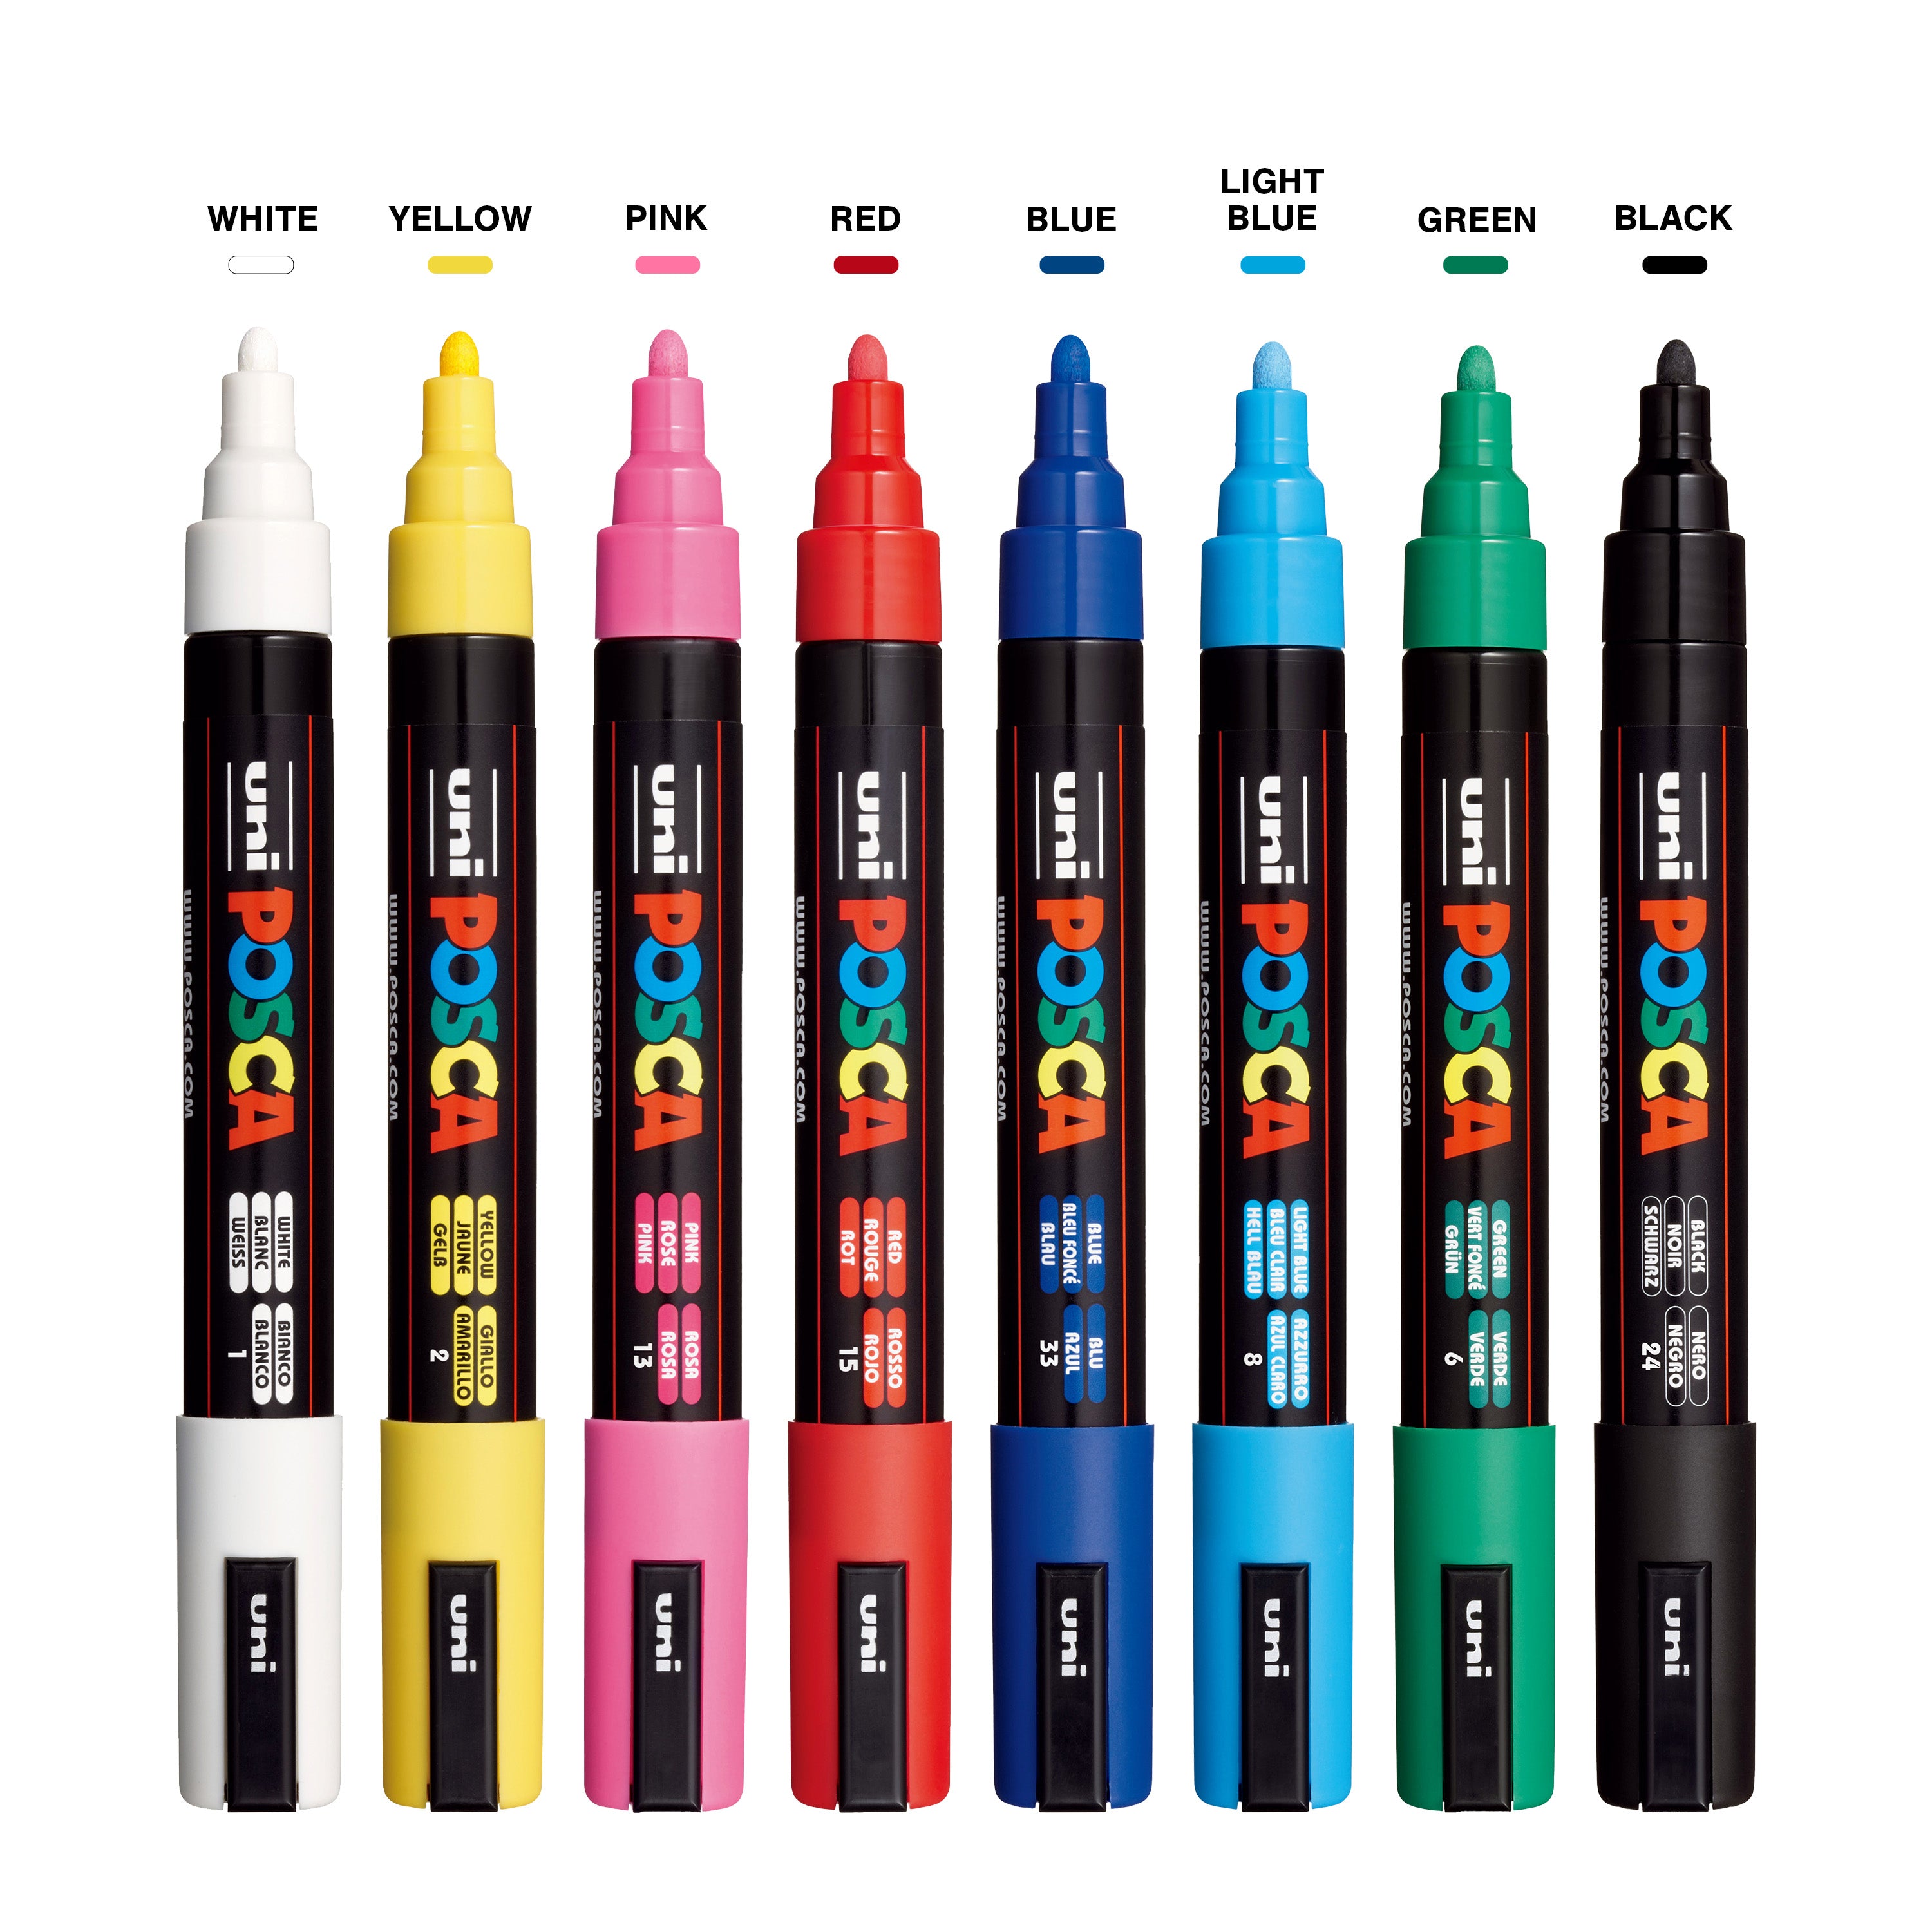 uni® POSCA® PC-3M Water-Based Paint Markers (8 Pack)